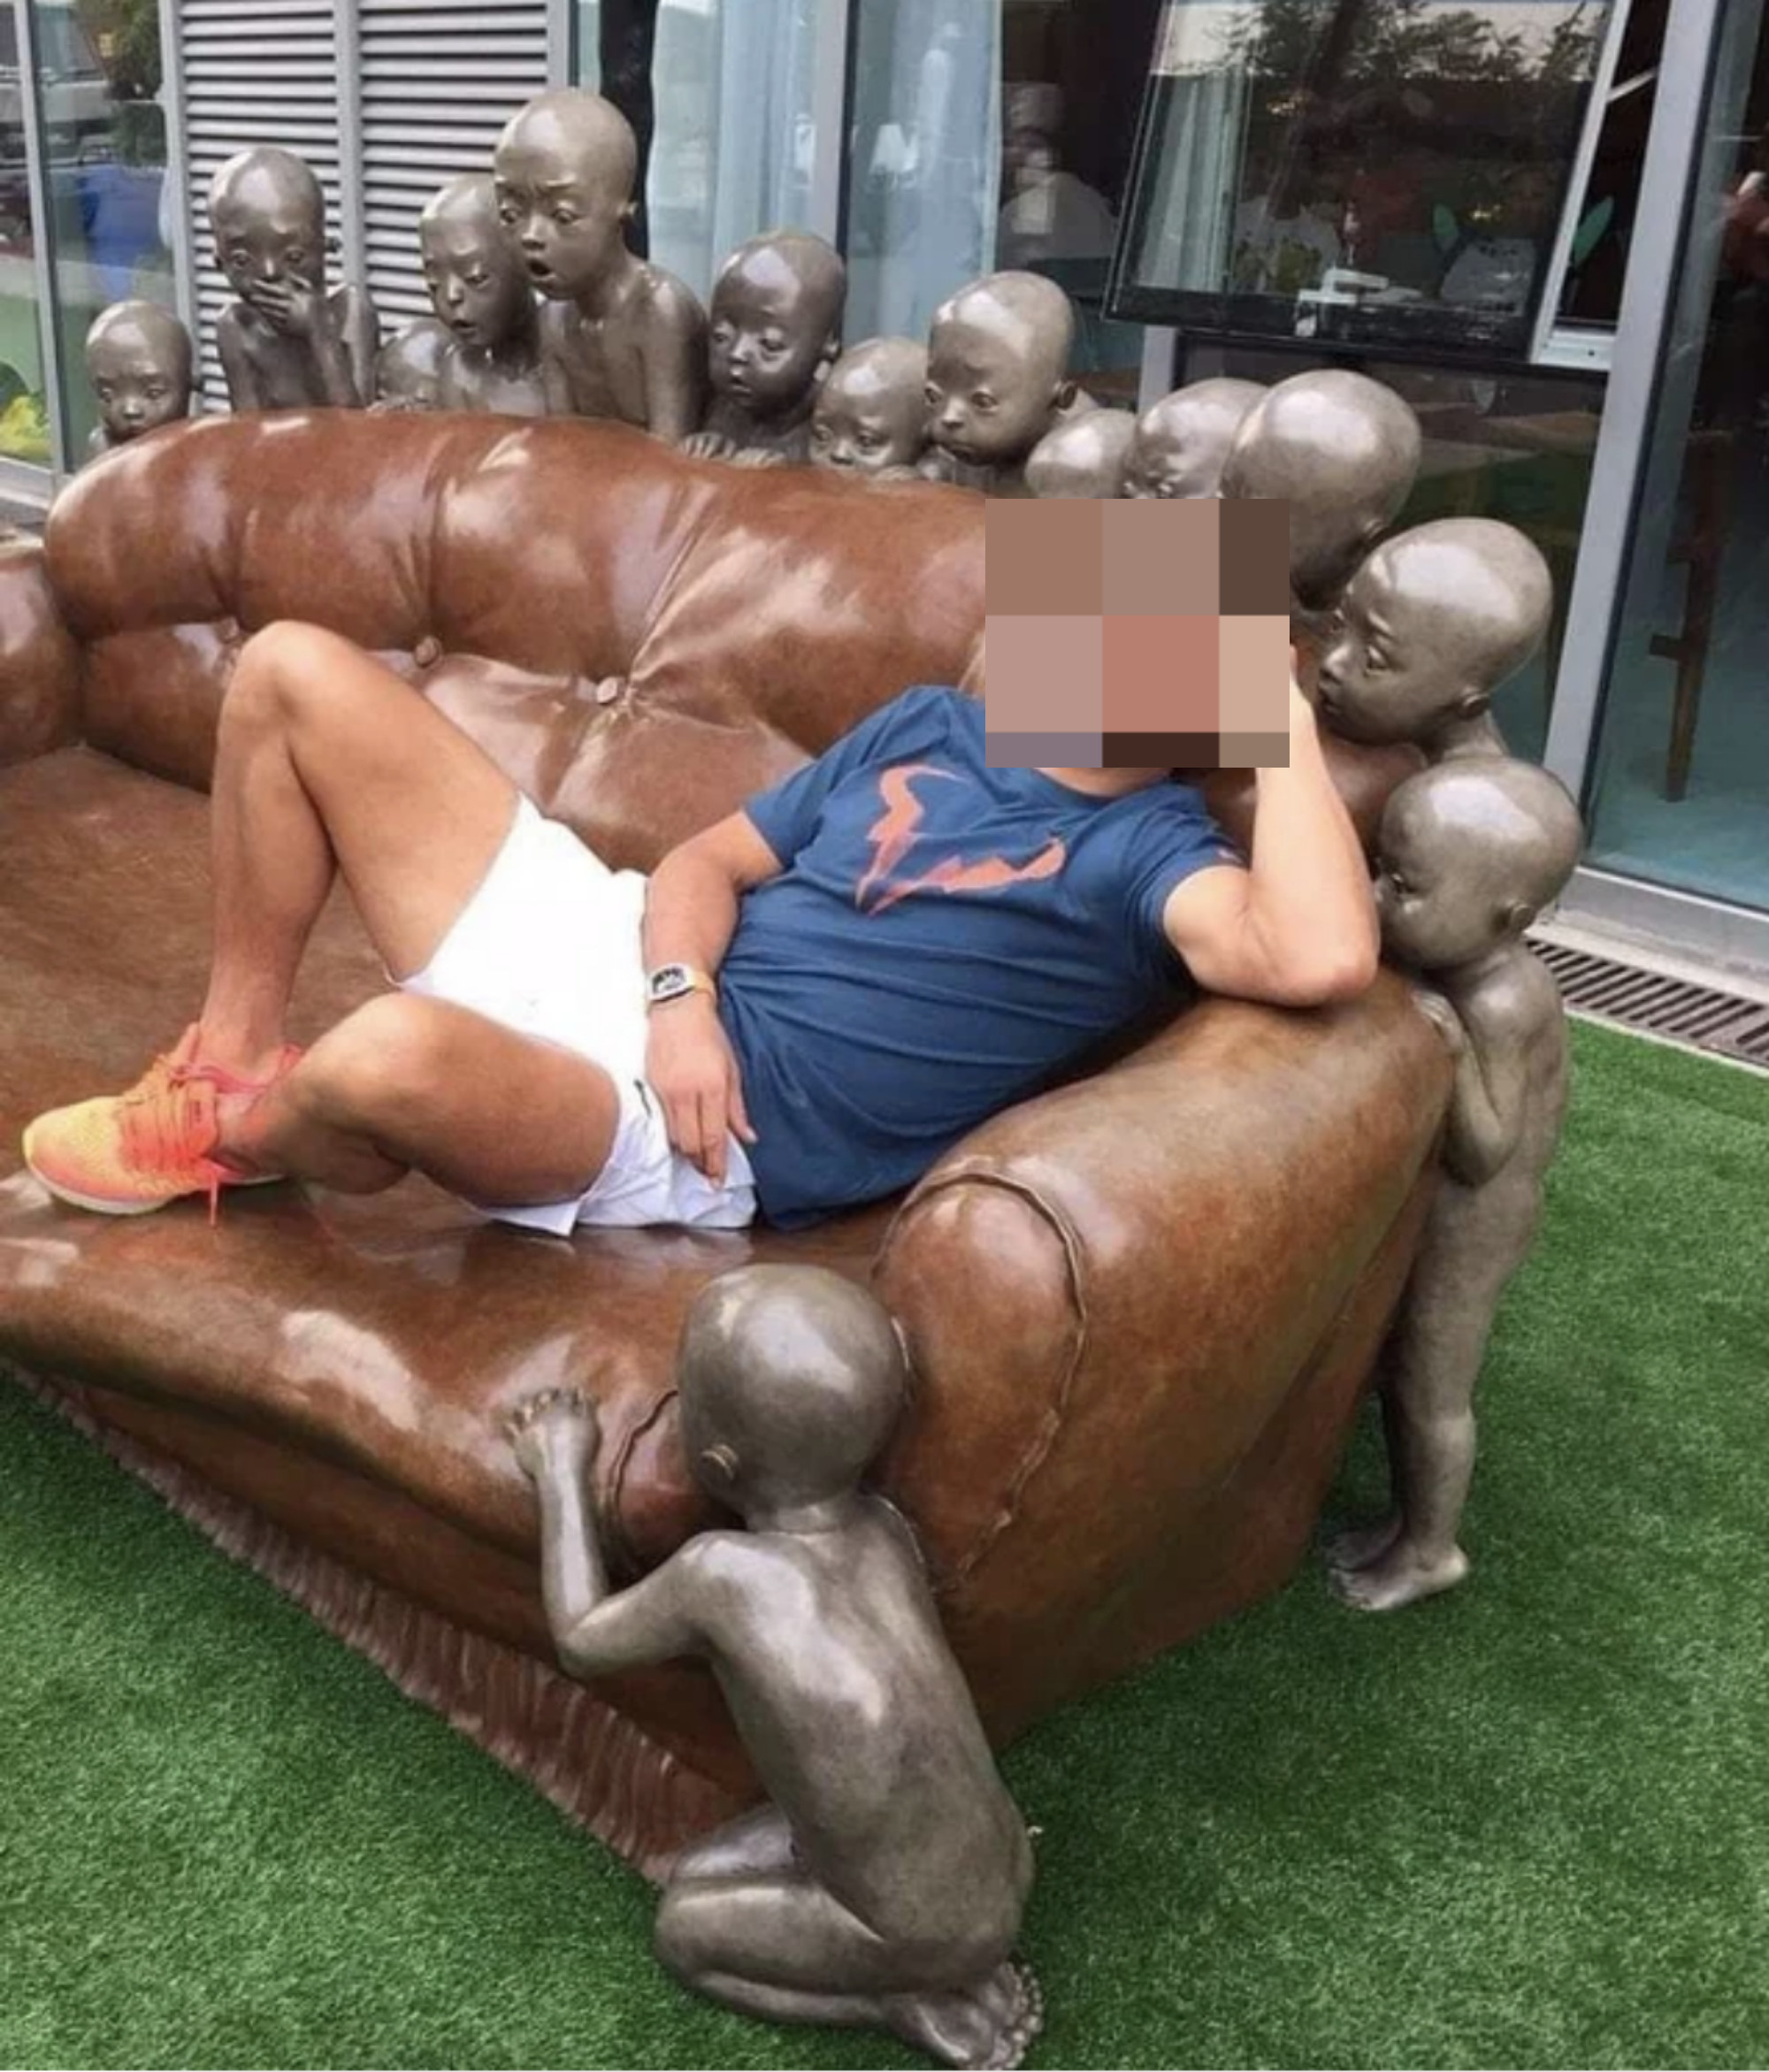 couch with naked children statues hovering around it